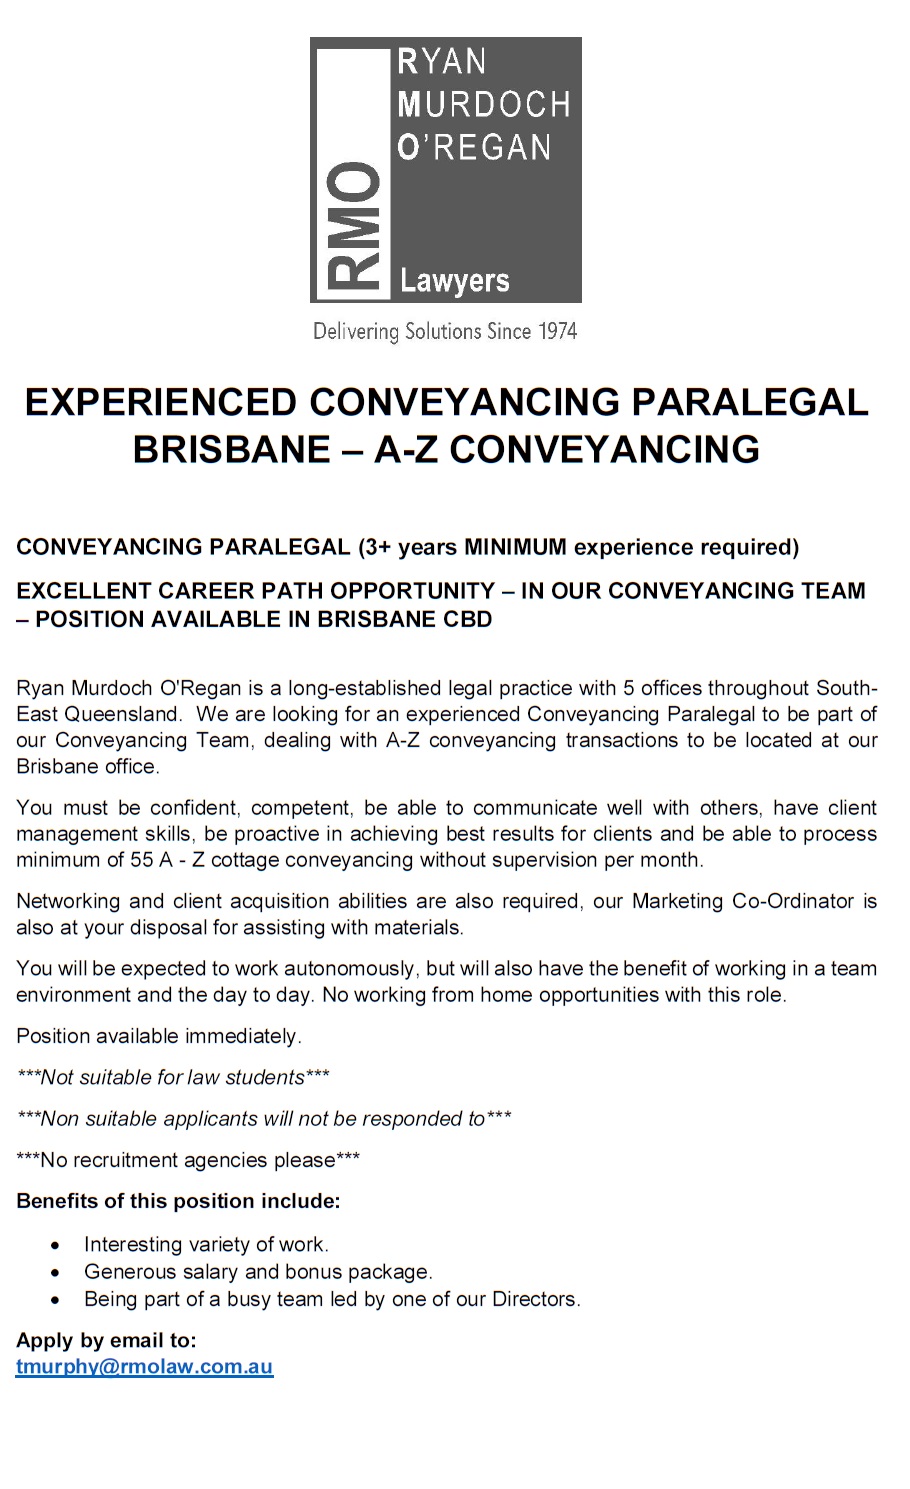 https://rmolaw.com.au/wp-content/uploads/2022/06/Experienced-Conveyancing-Paralegal-Brisbane-A-Z-Conveyancing.jpg